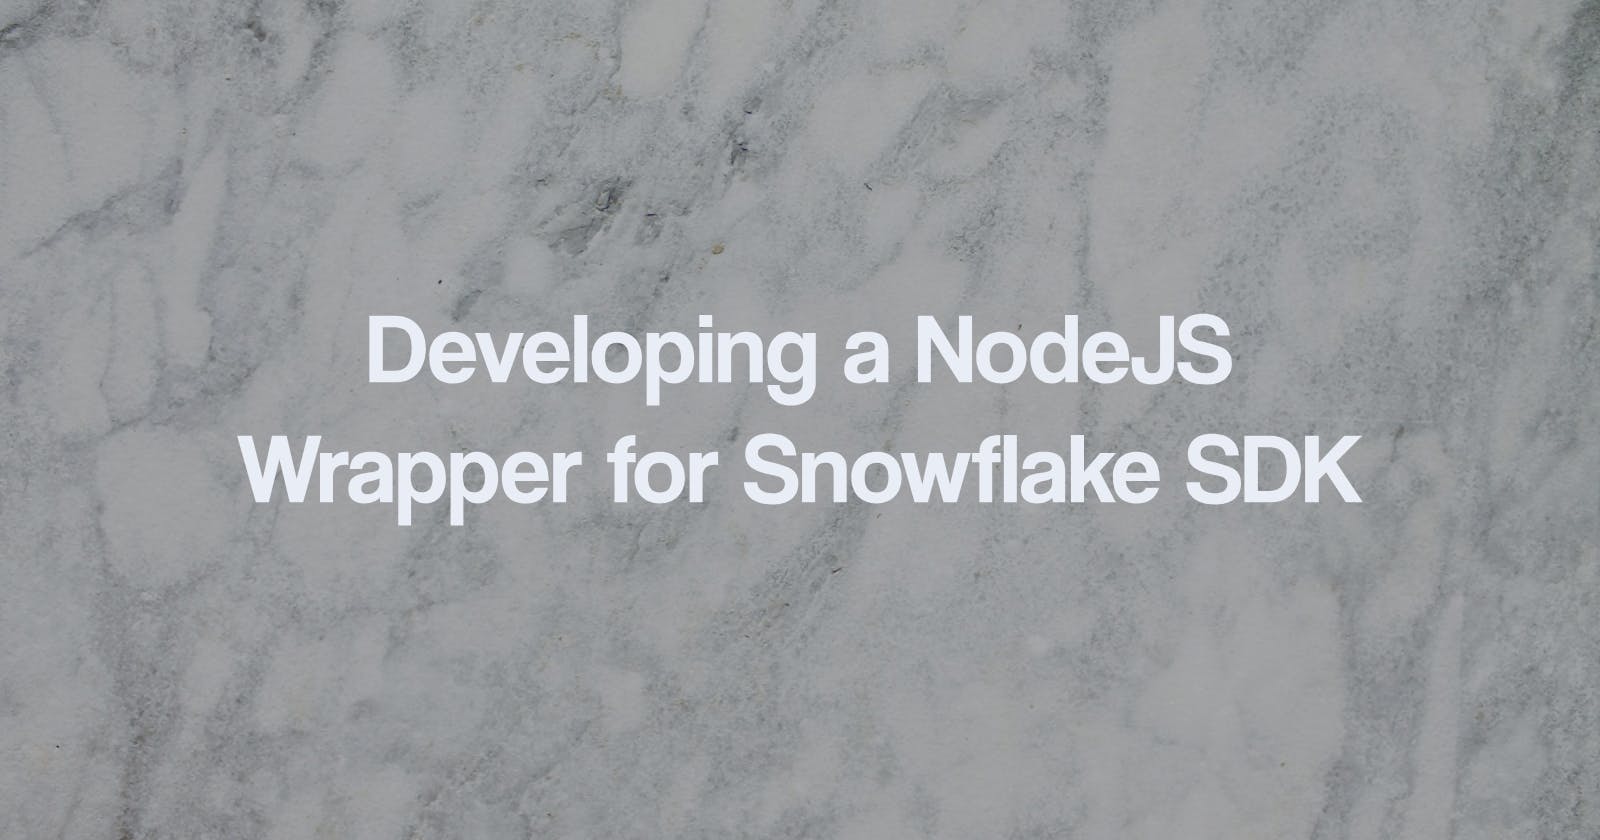 Developing a NodeJS Wrapper for Snowflake SDK (Pagination included)